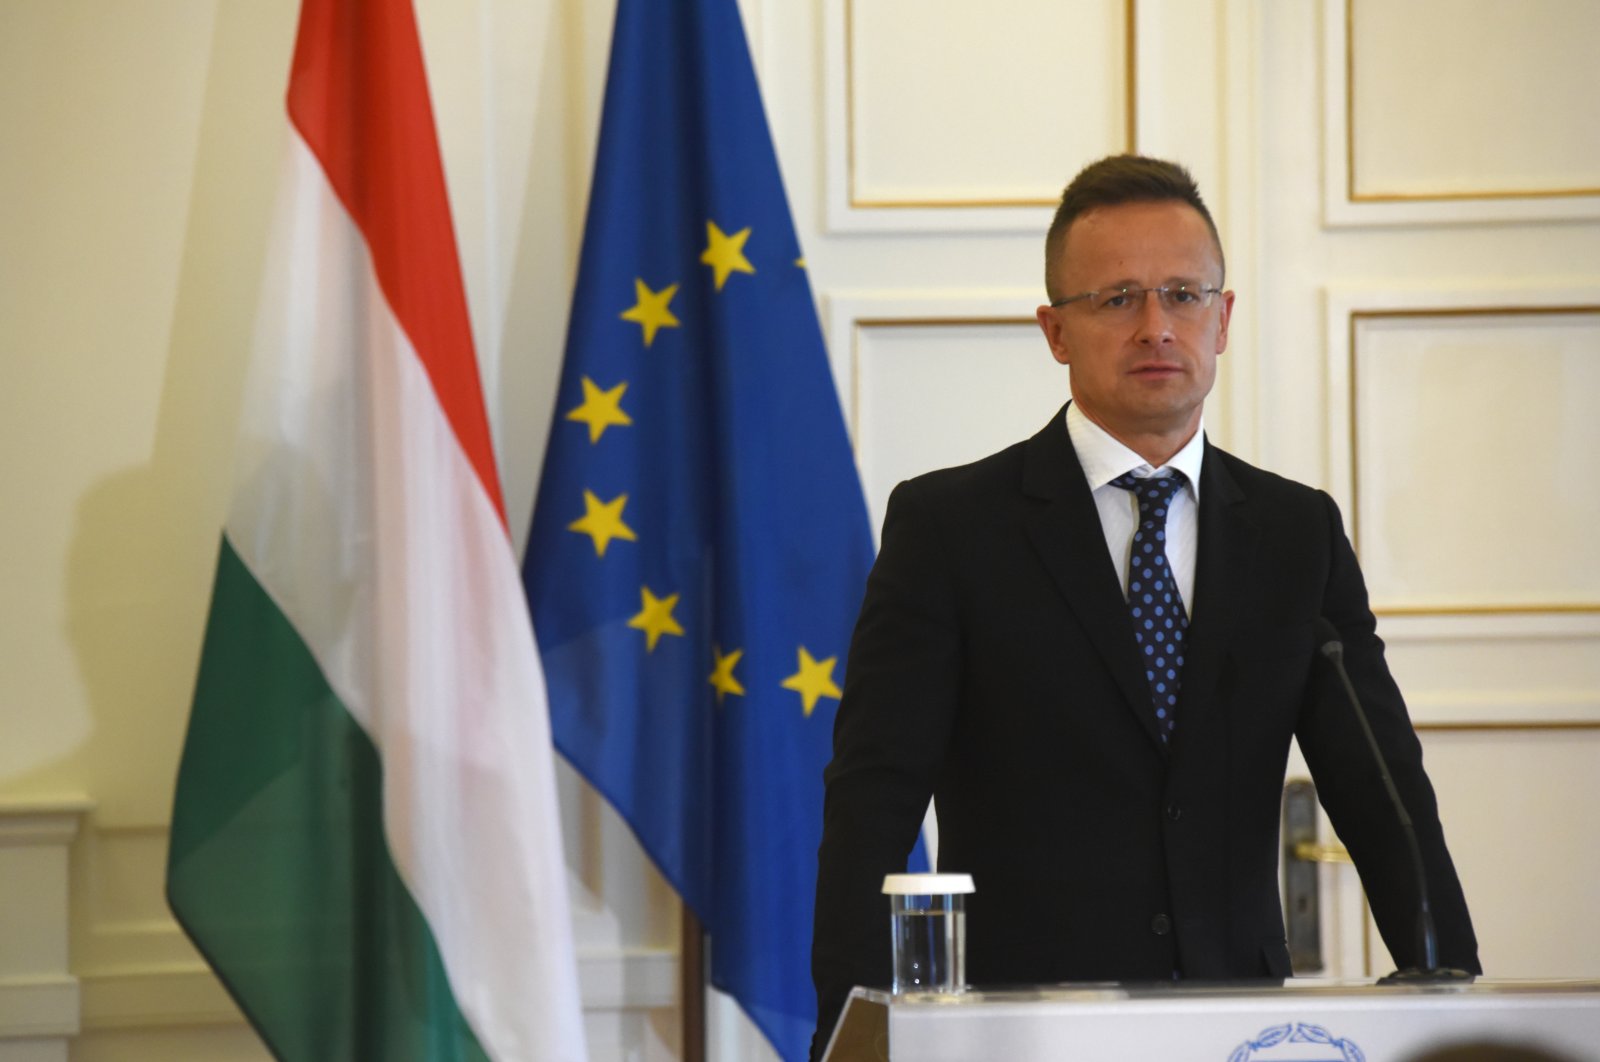 Hungarian Foreign Minister Péter Szijjártó in a news conference with then-Greek Foreign Minister, Nikos Dendias in Athens, Greece on June 22, 2022. (Reuters File Photo)